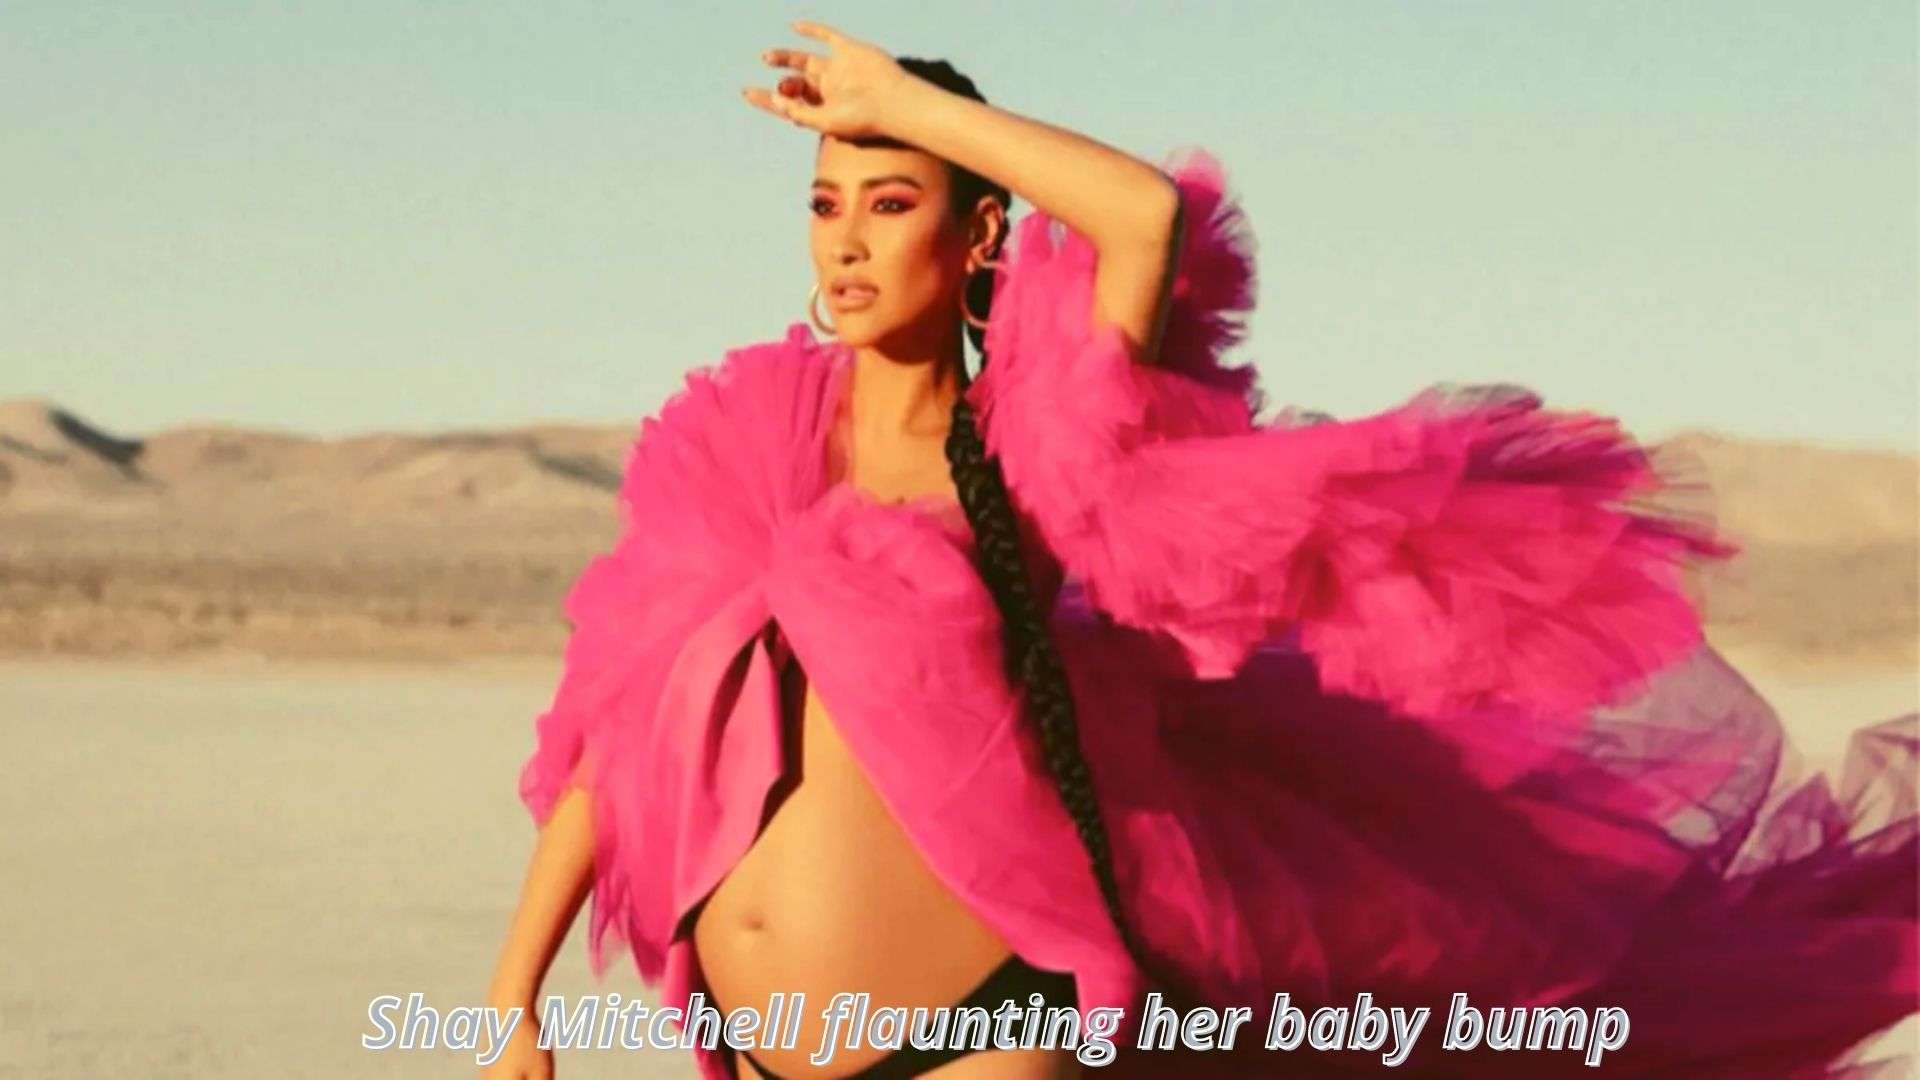 Shay Mitchell announced her second pregnancy